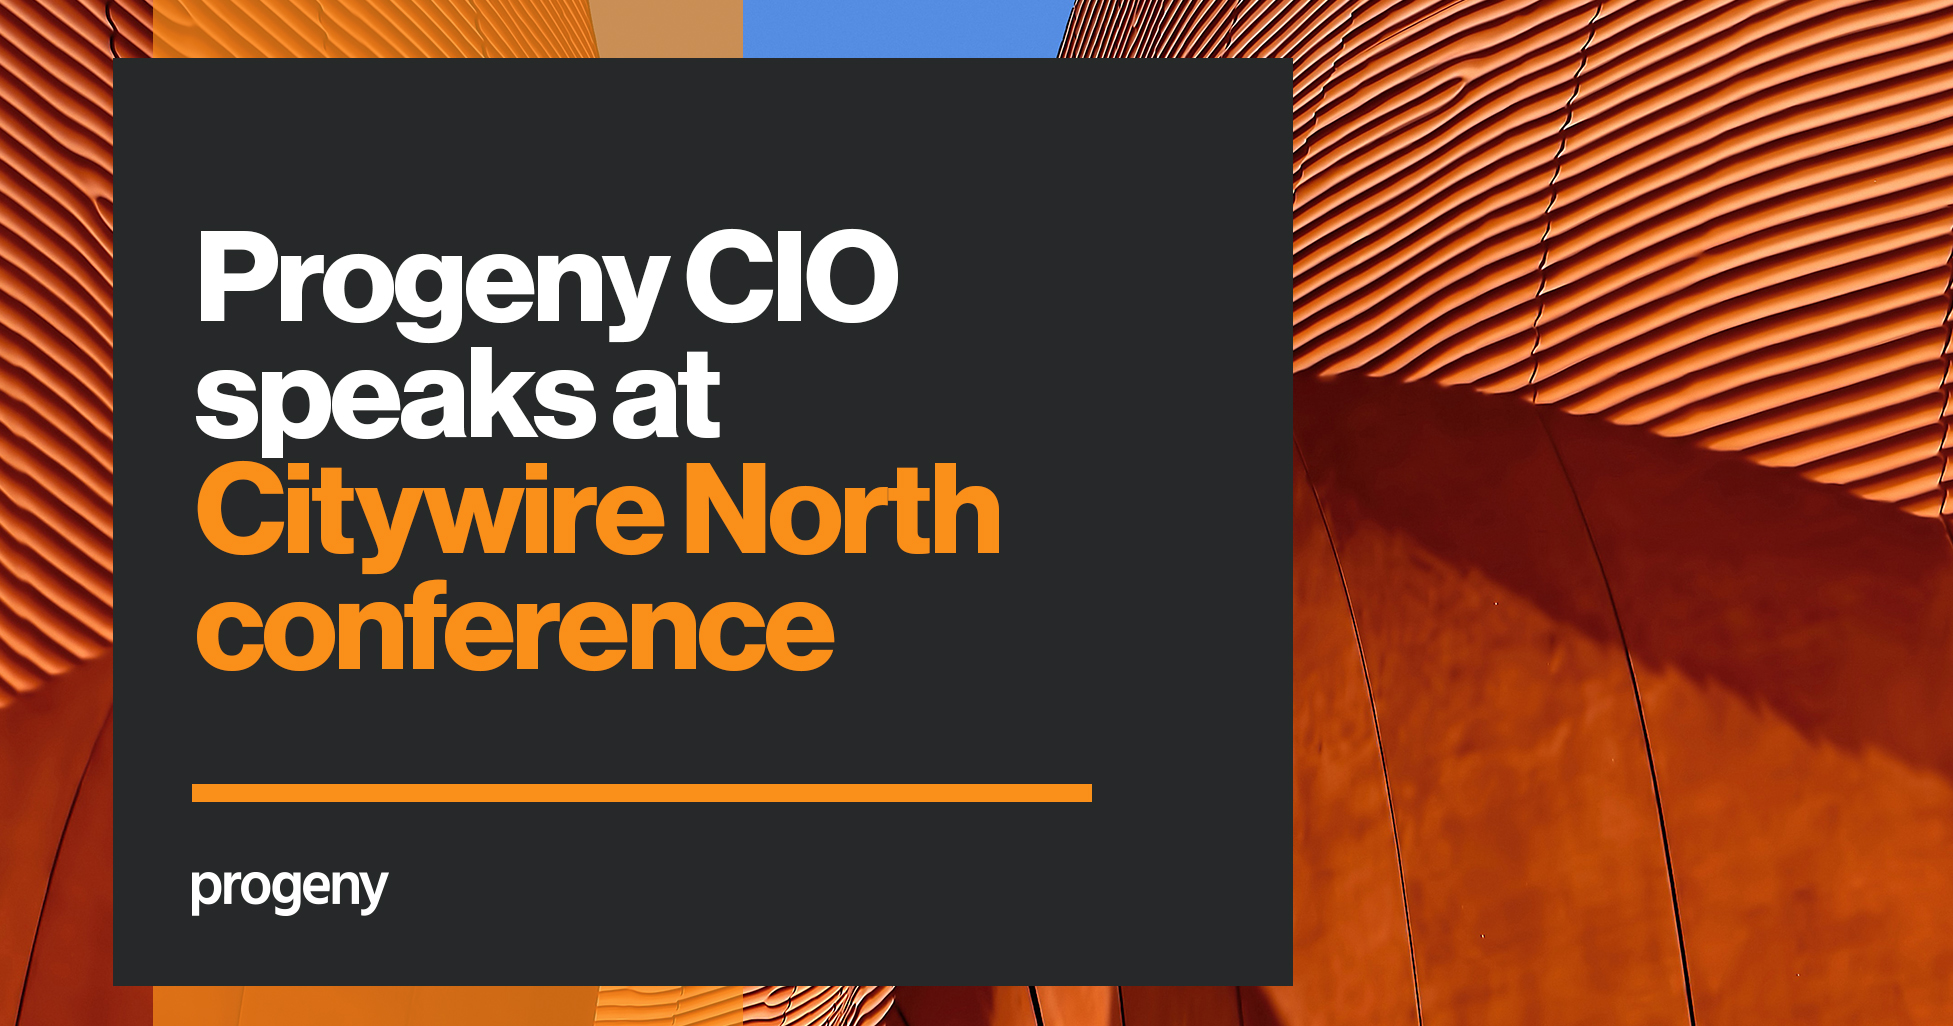 Progeny CIO speaks at Citywire North conference